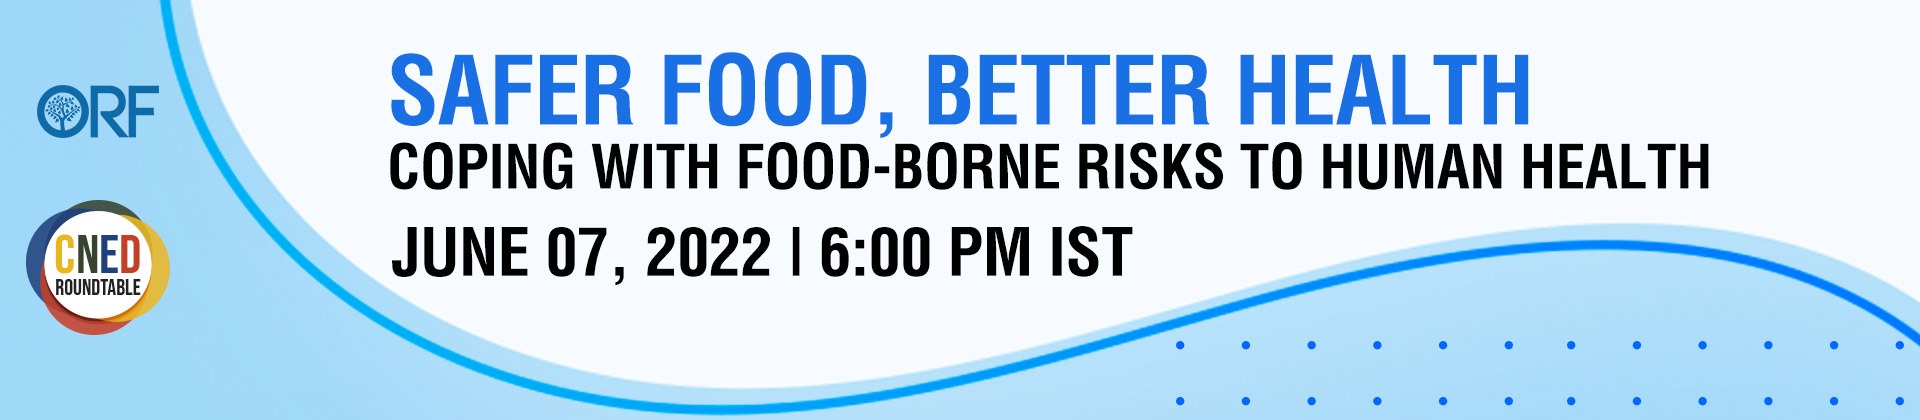 Safer Food, Better Health: Coping with Food-borne Risks to Human Health